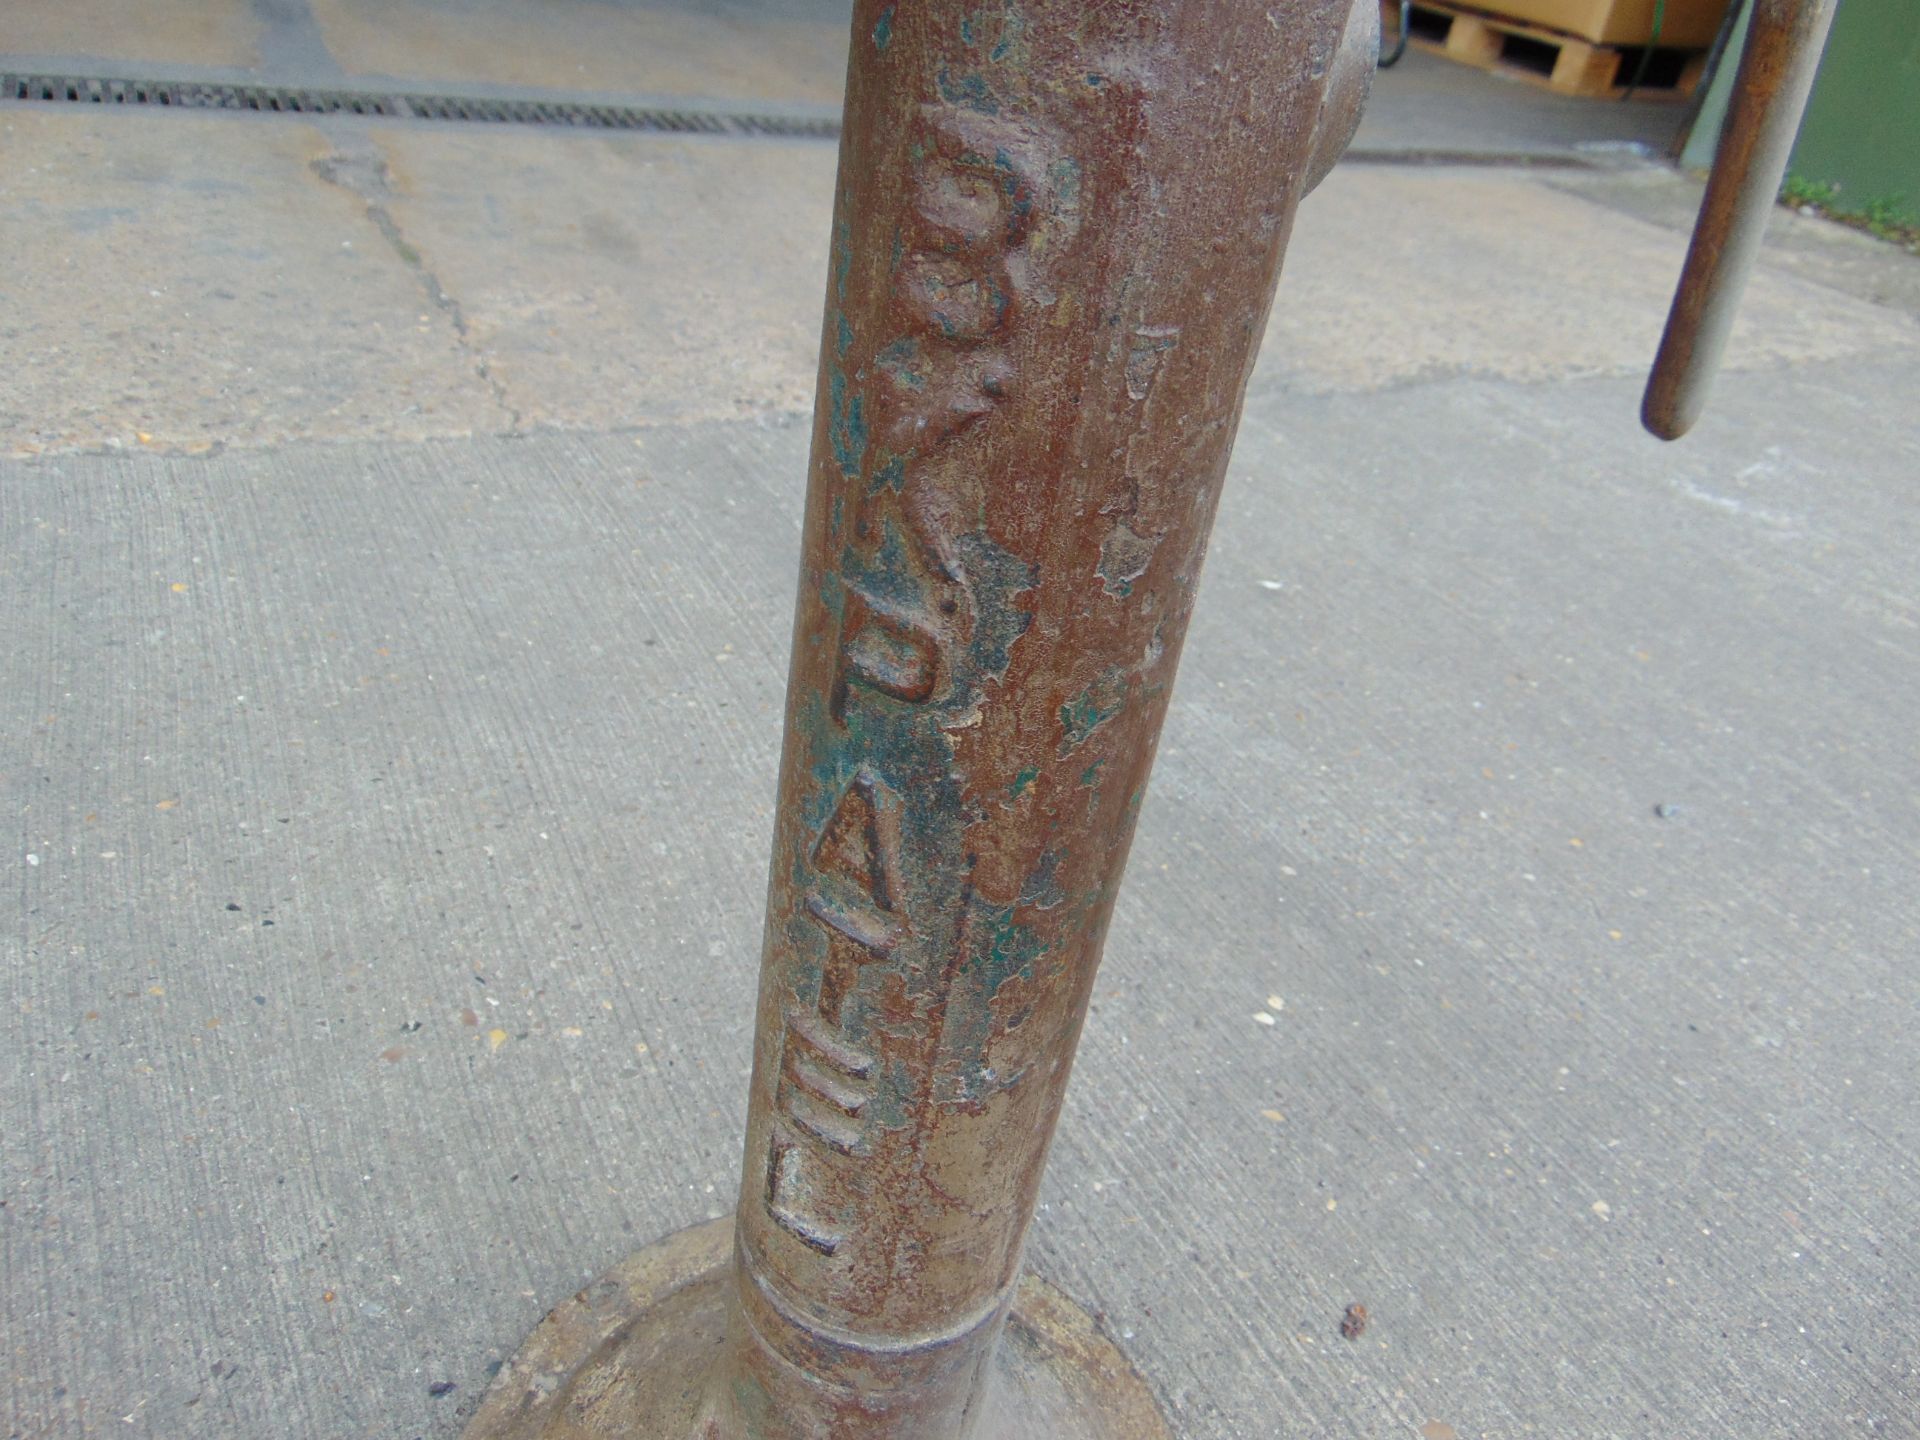 Genuine Anitique Full Size Cast Iron Water Pump - Image 6 of 6